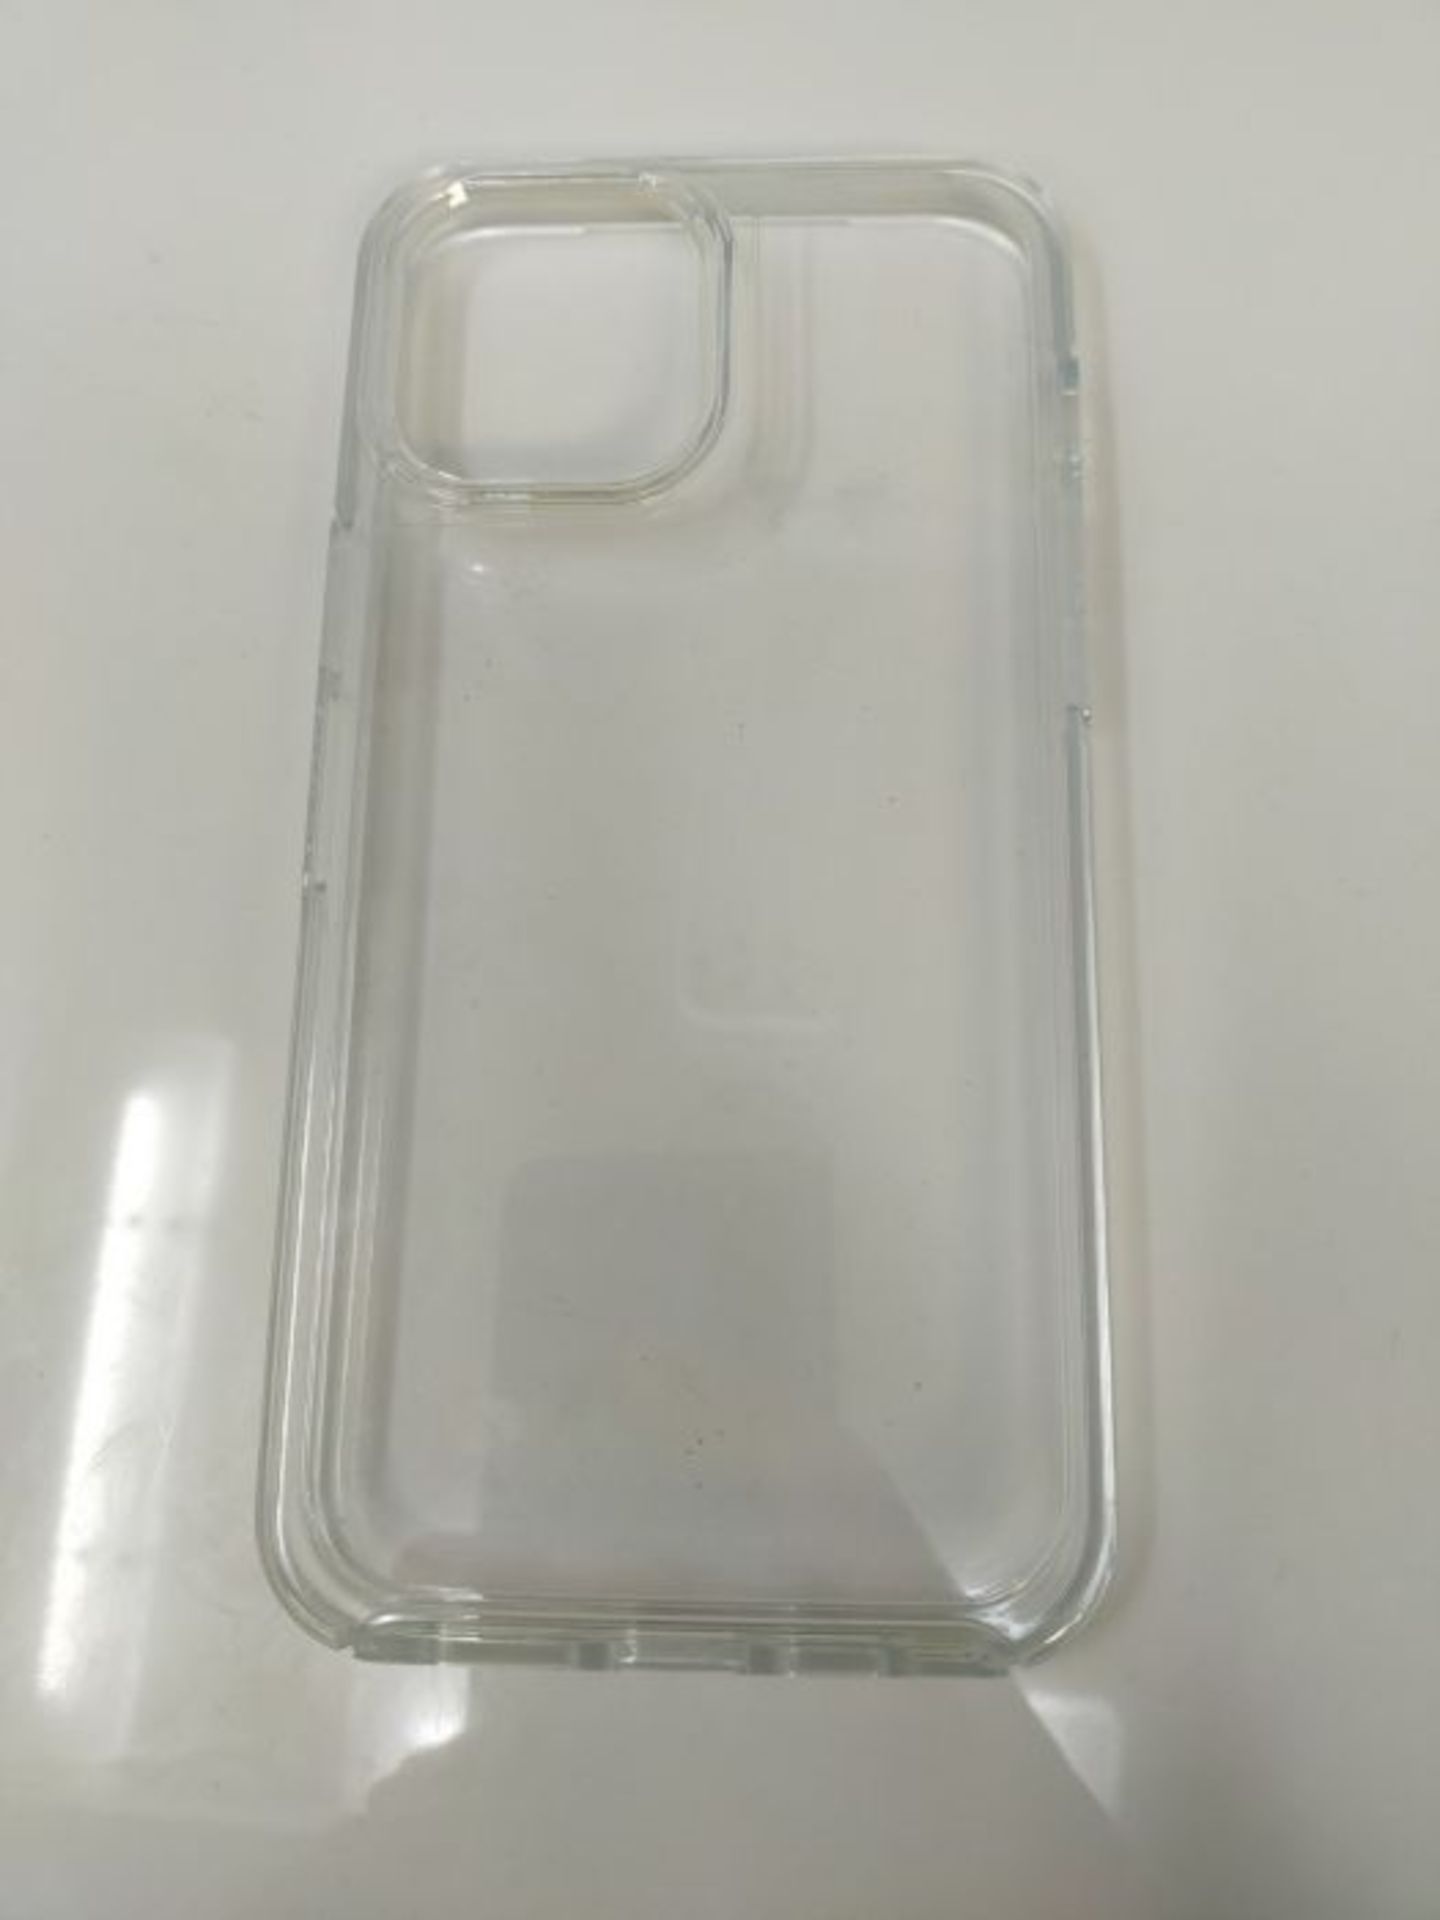 OtterBox for Apple iPhone 12 Pro Max, Sleek Drop Proof Protective Clear Case, Symmetry - Image 3 of 3